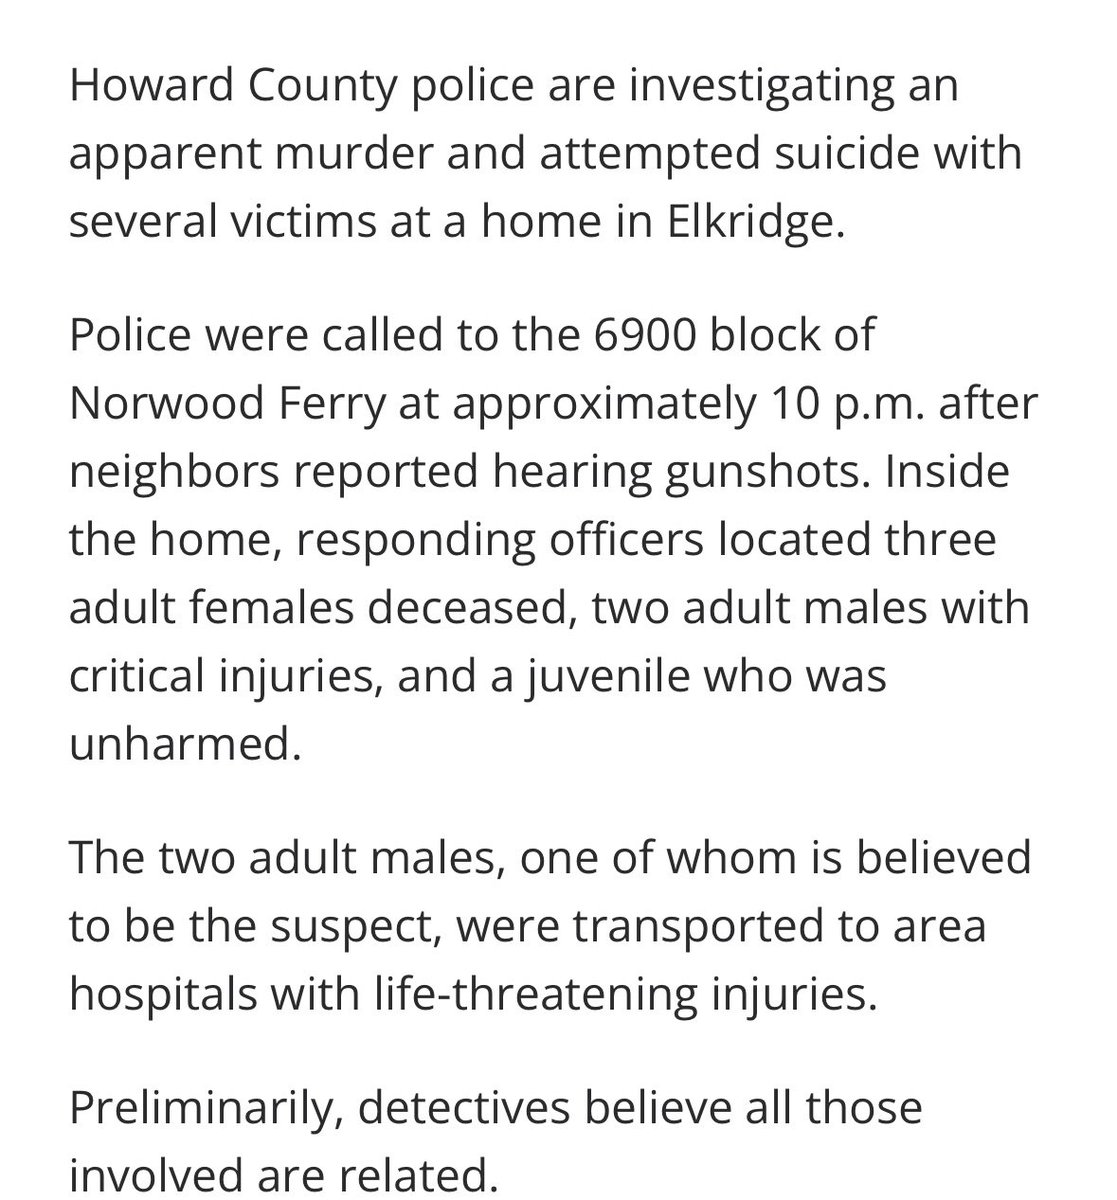 #BREAKING: 3 women dead, 2 men in critical condition after apparent murder/attempted suicide in Elkridge. 

Horrible details out of Howard County late tonight @wjz